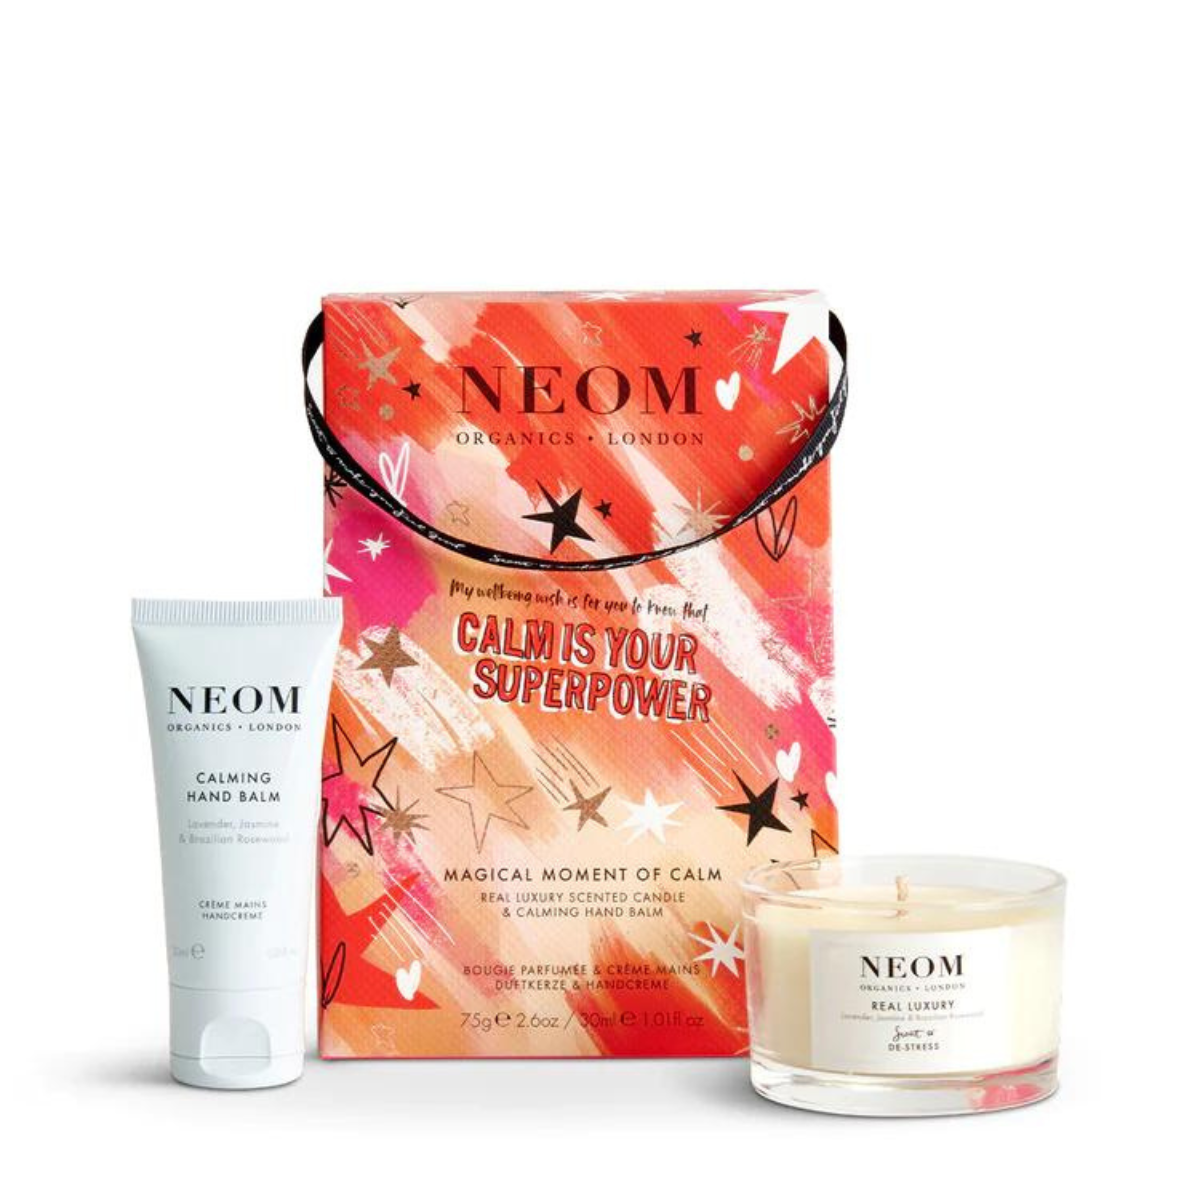 Neom Magical Moment Of Calm.